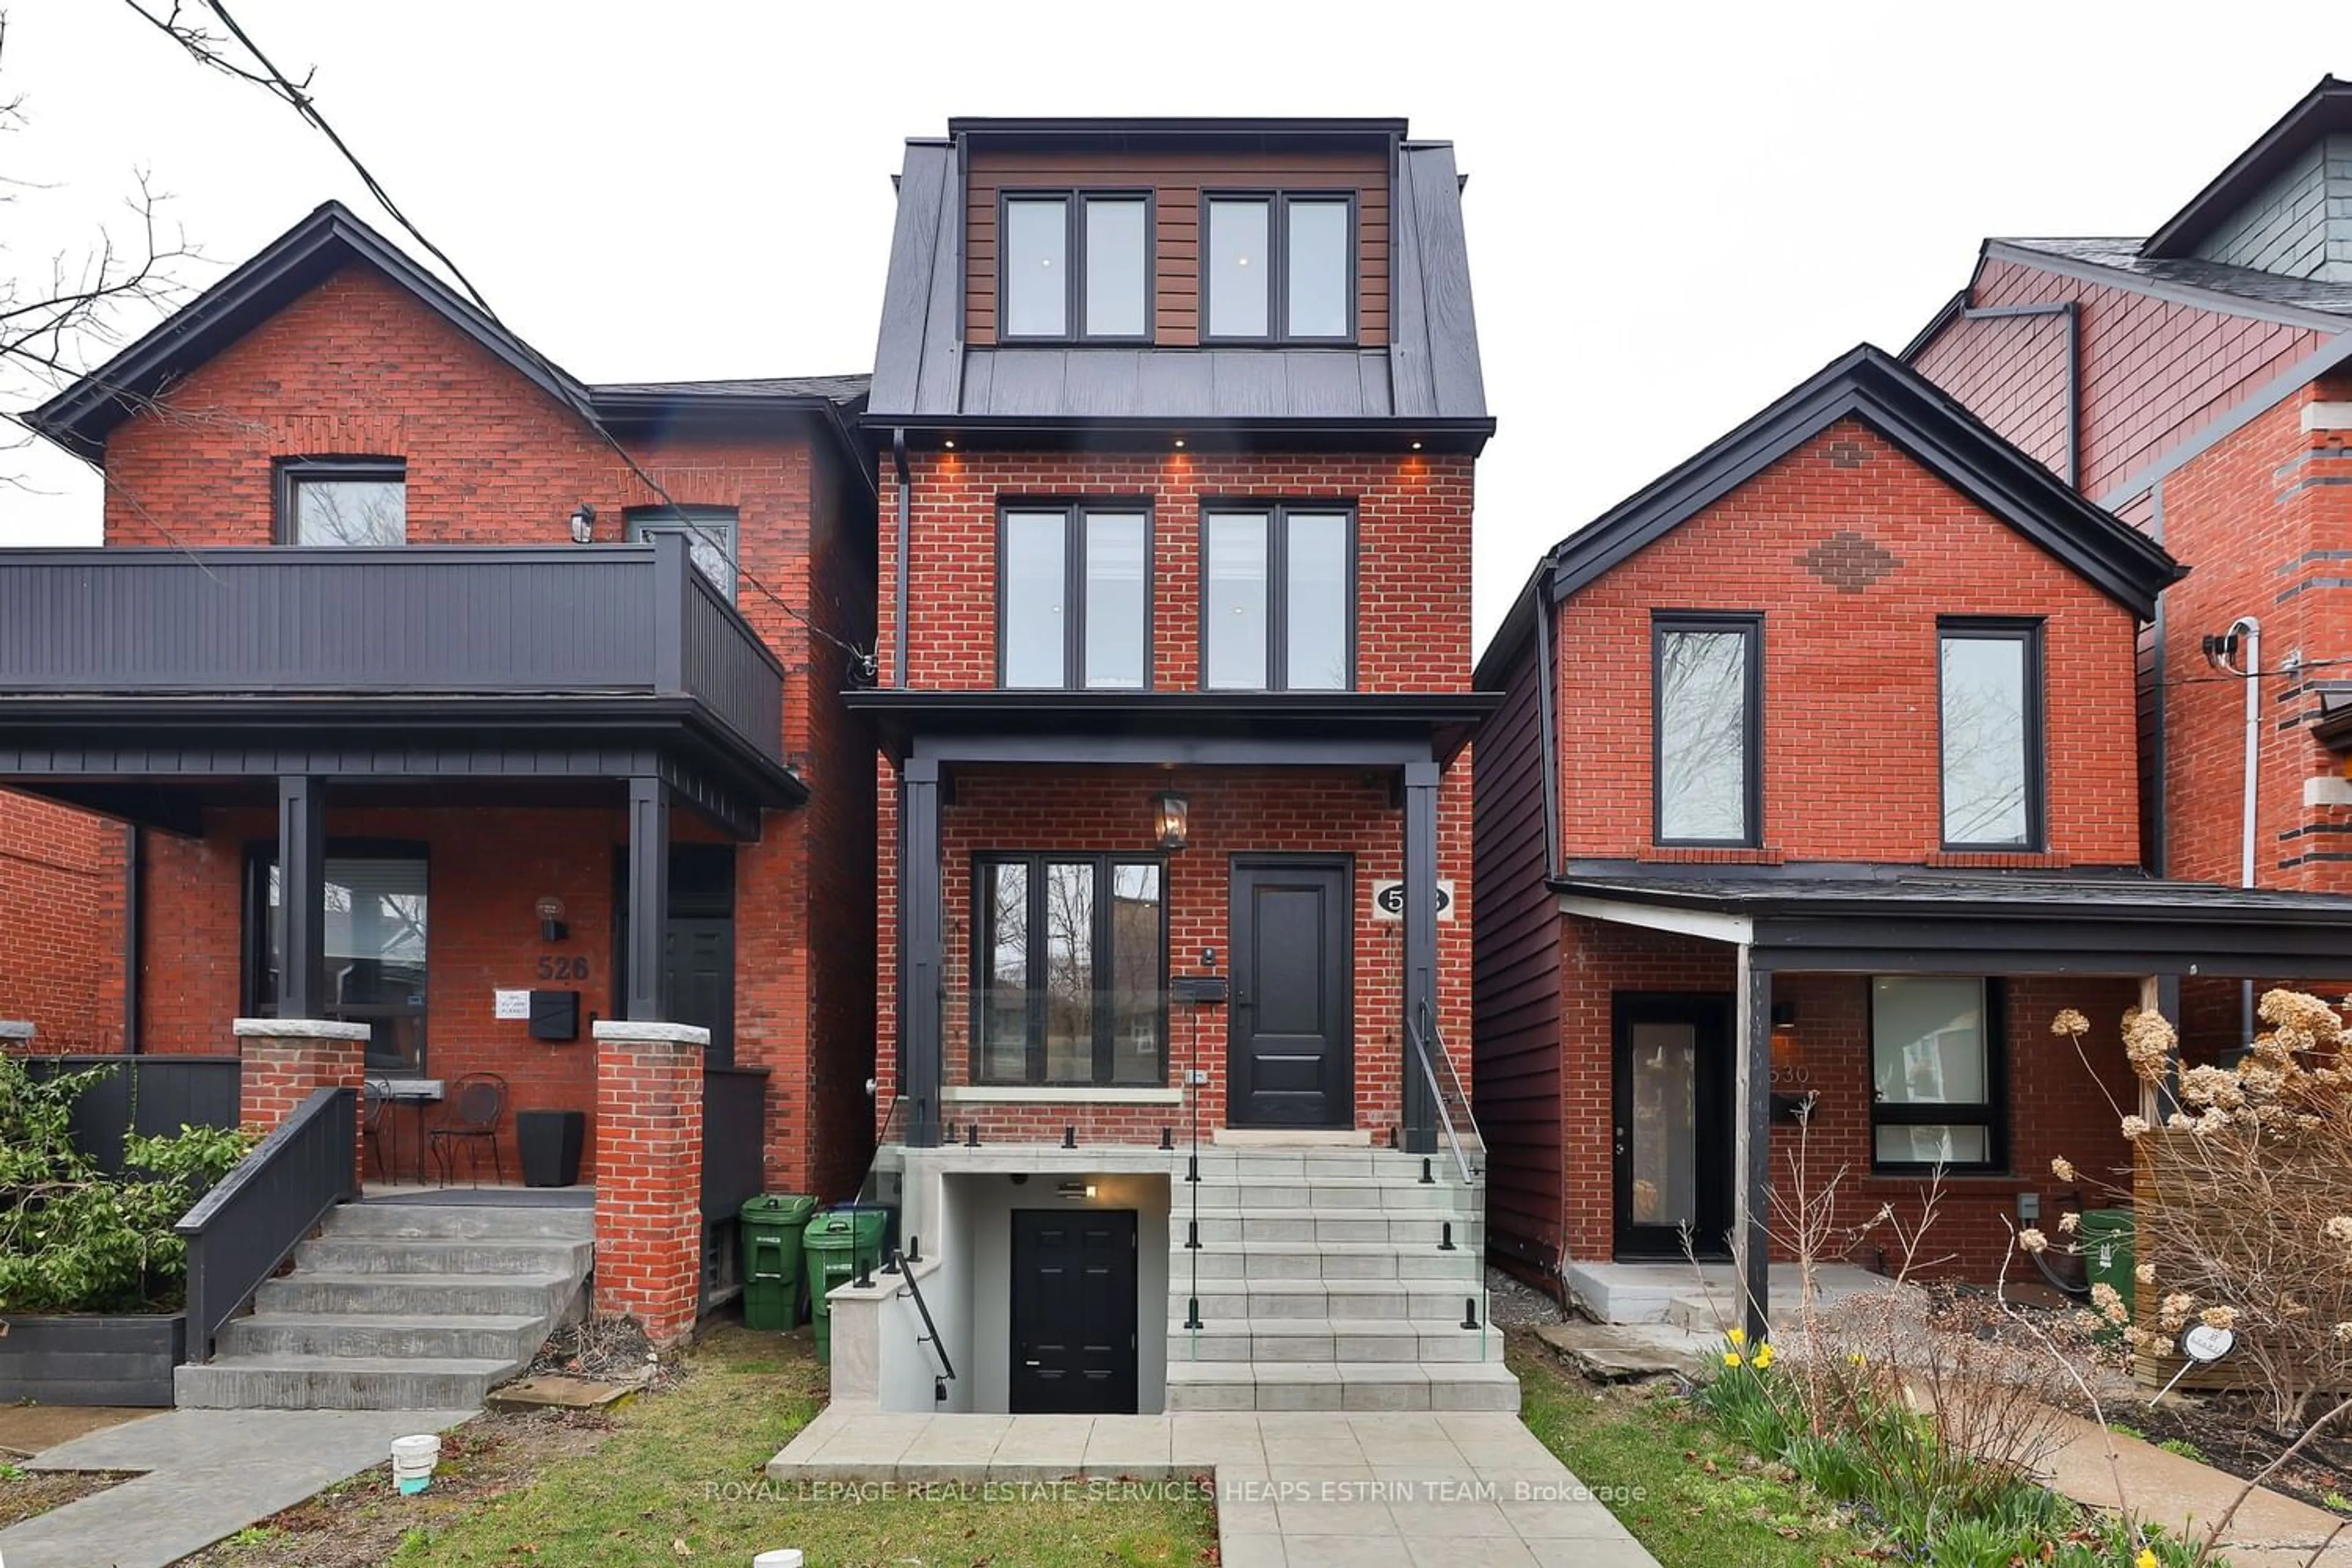 Home with brick exterior material for 528 Clinton St, Toronto Ontario M6G 2Z6